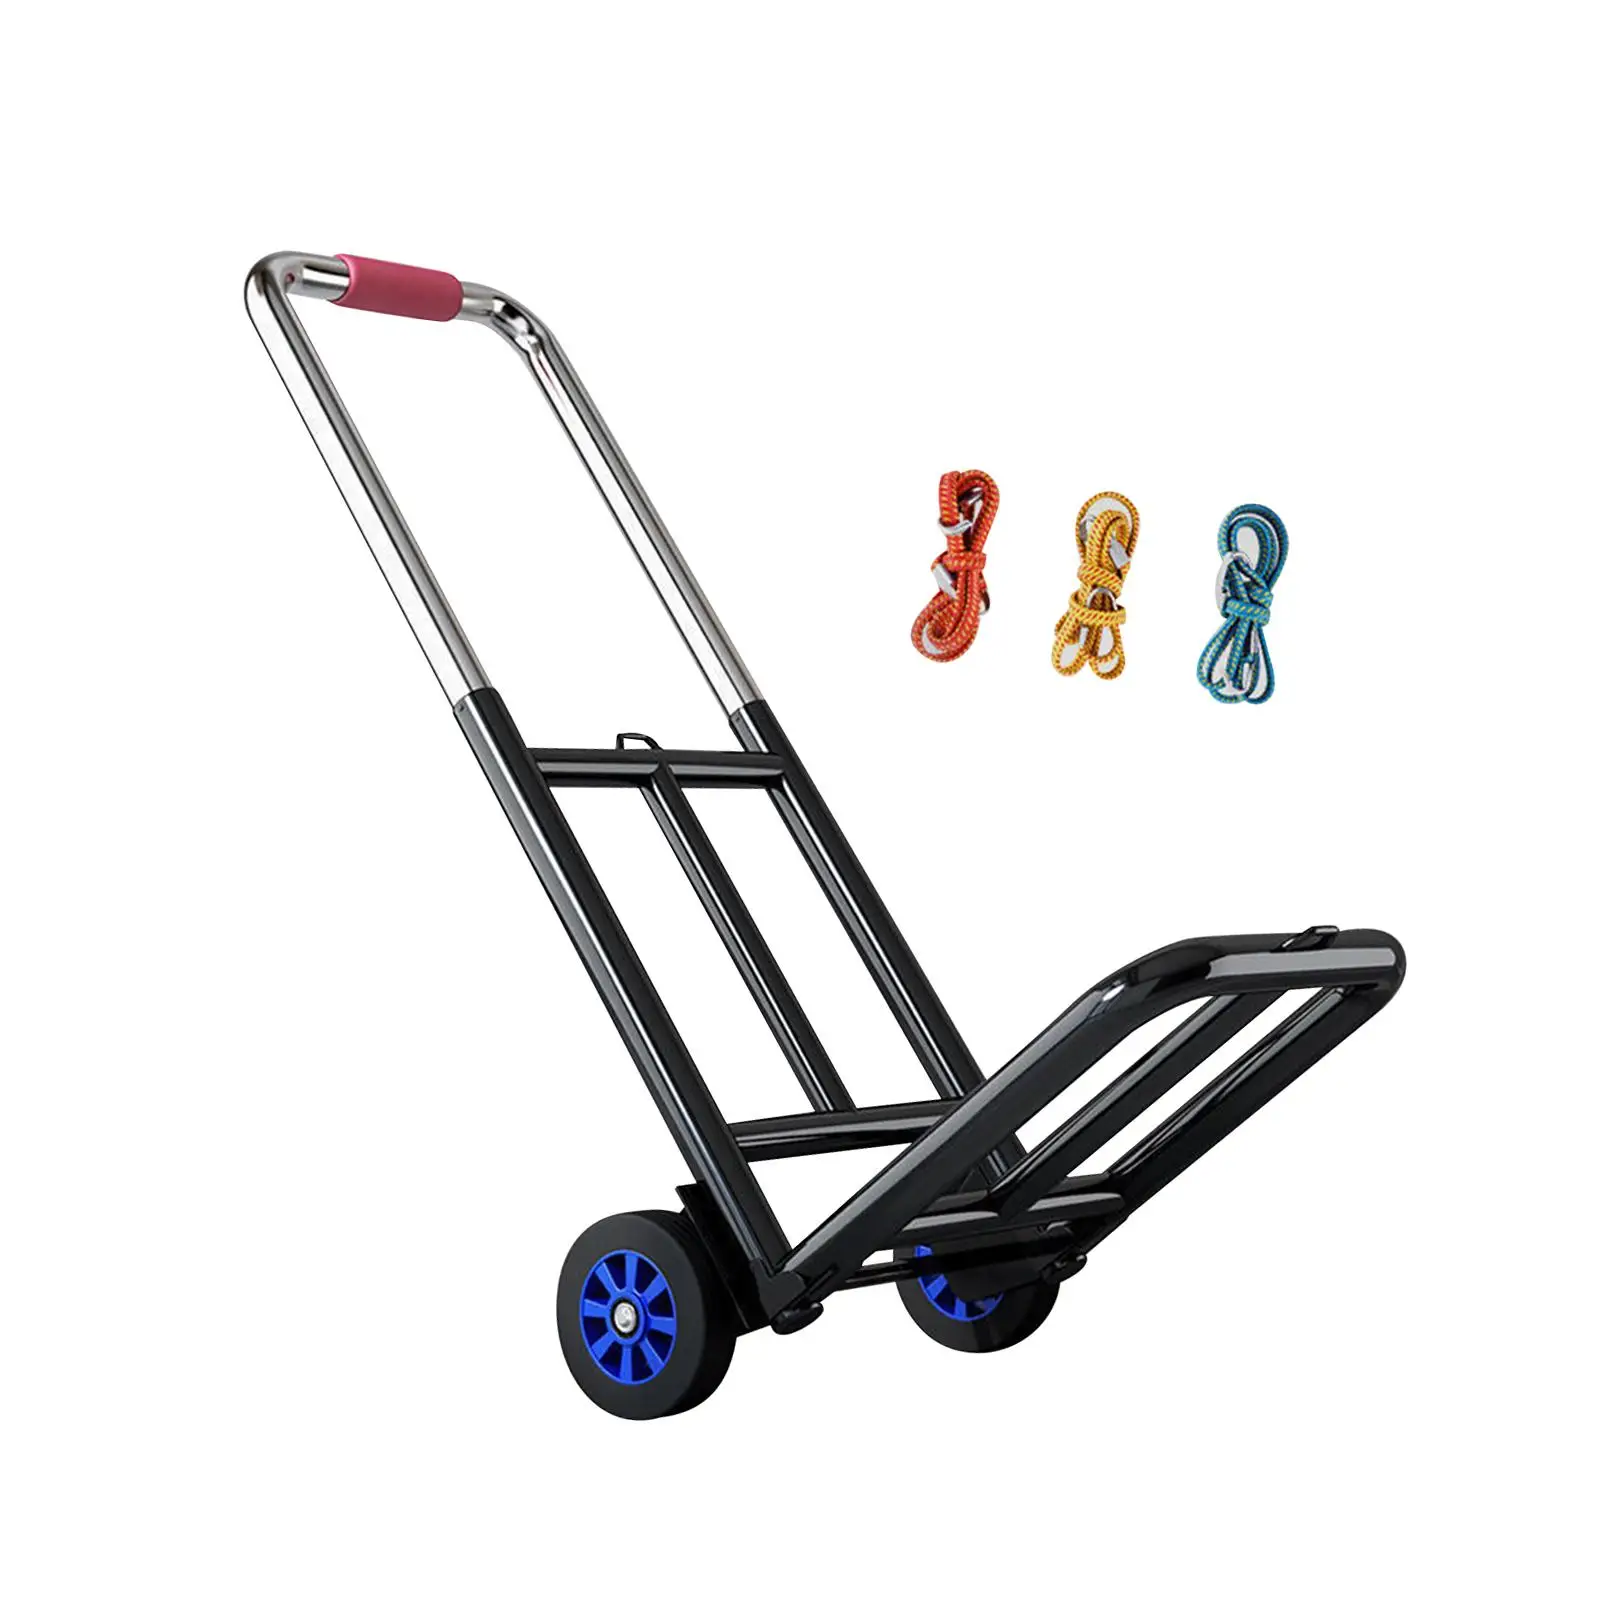 Folding Hand Truck Utility Luggage Trolley Portable Telescopic Handle Heavy Duty Luggage Cart for Shopping Moving Transportation